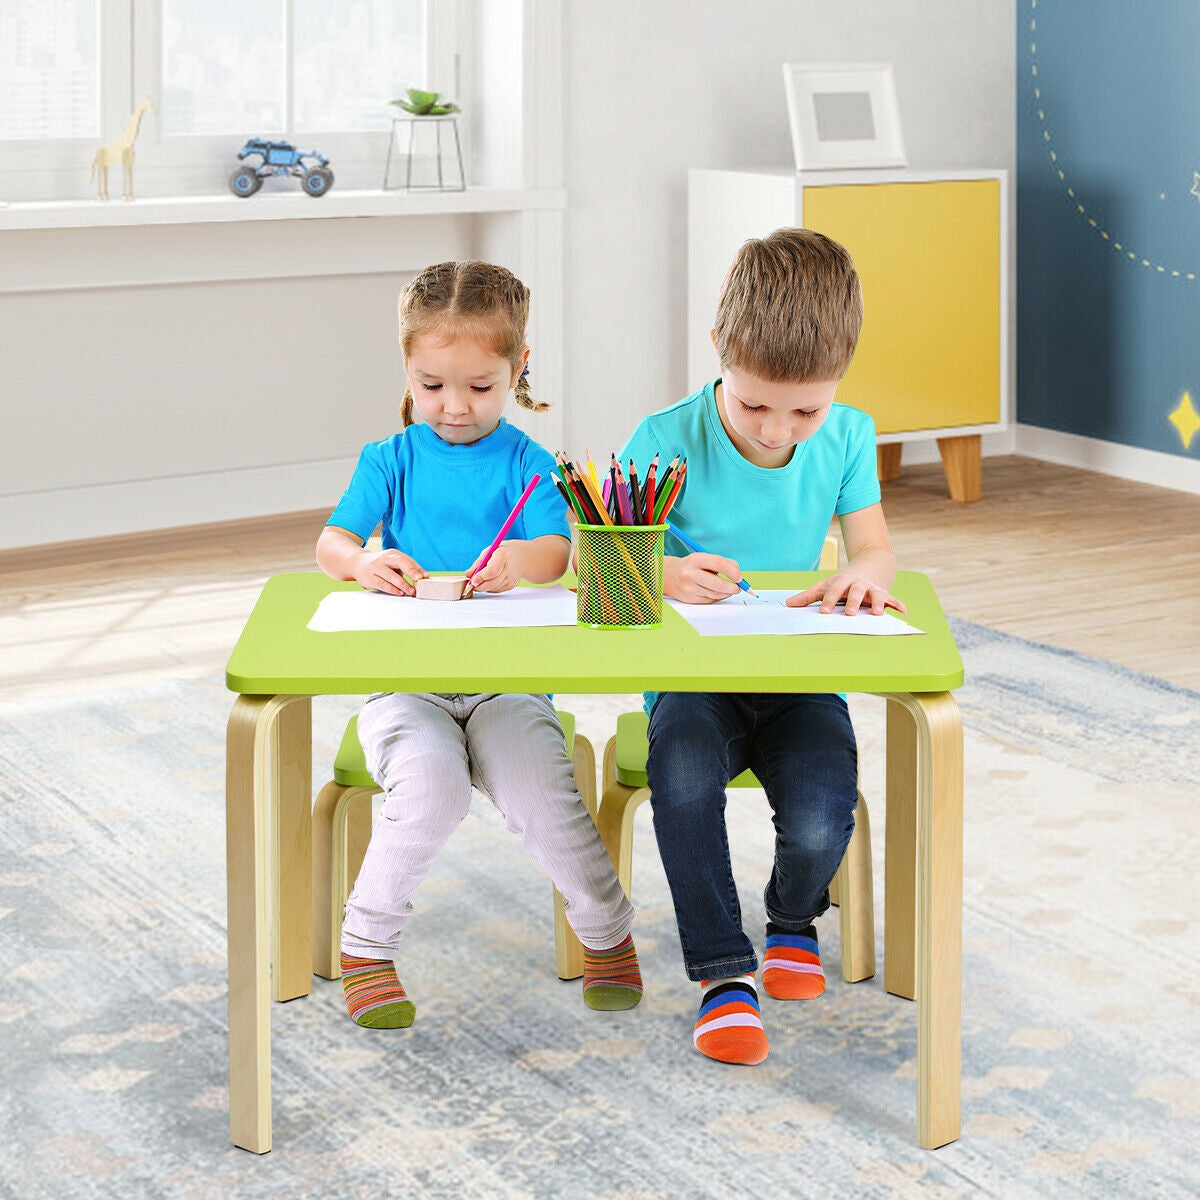 Ergonomic Design: Prioritize your child's comfort and health with a burr-free surface, rounded edges, and ergonomically designed curved chair backs, preventing injuries and supporting spine health.